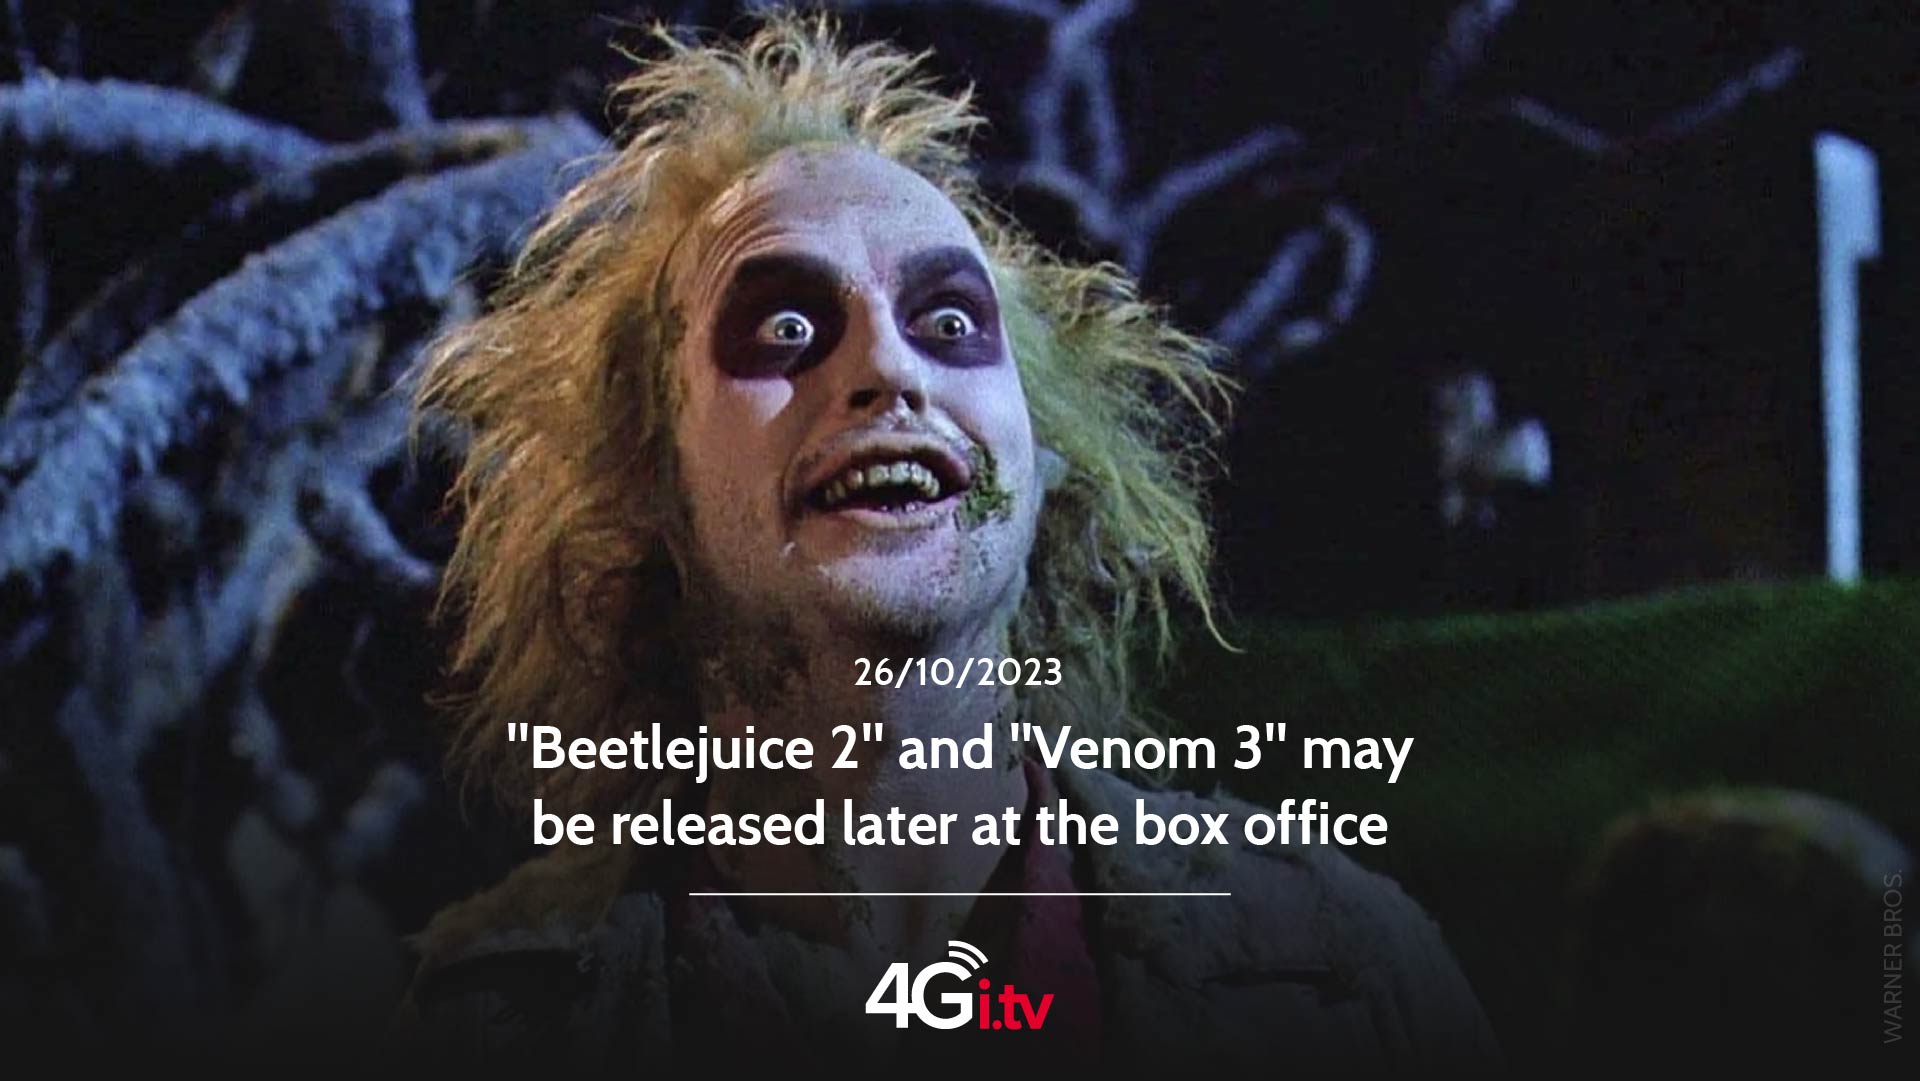 Lesen Sie mehr über den Artikel “Beetlejuice 2” and “Venom 3” may be released later at the box office